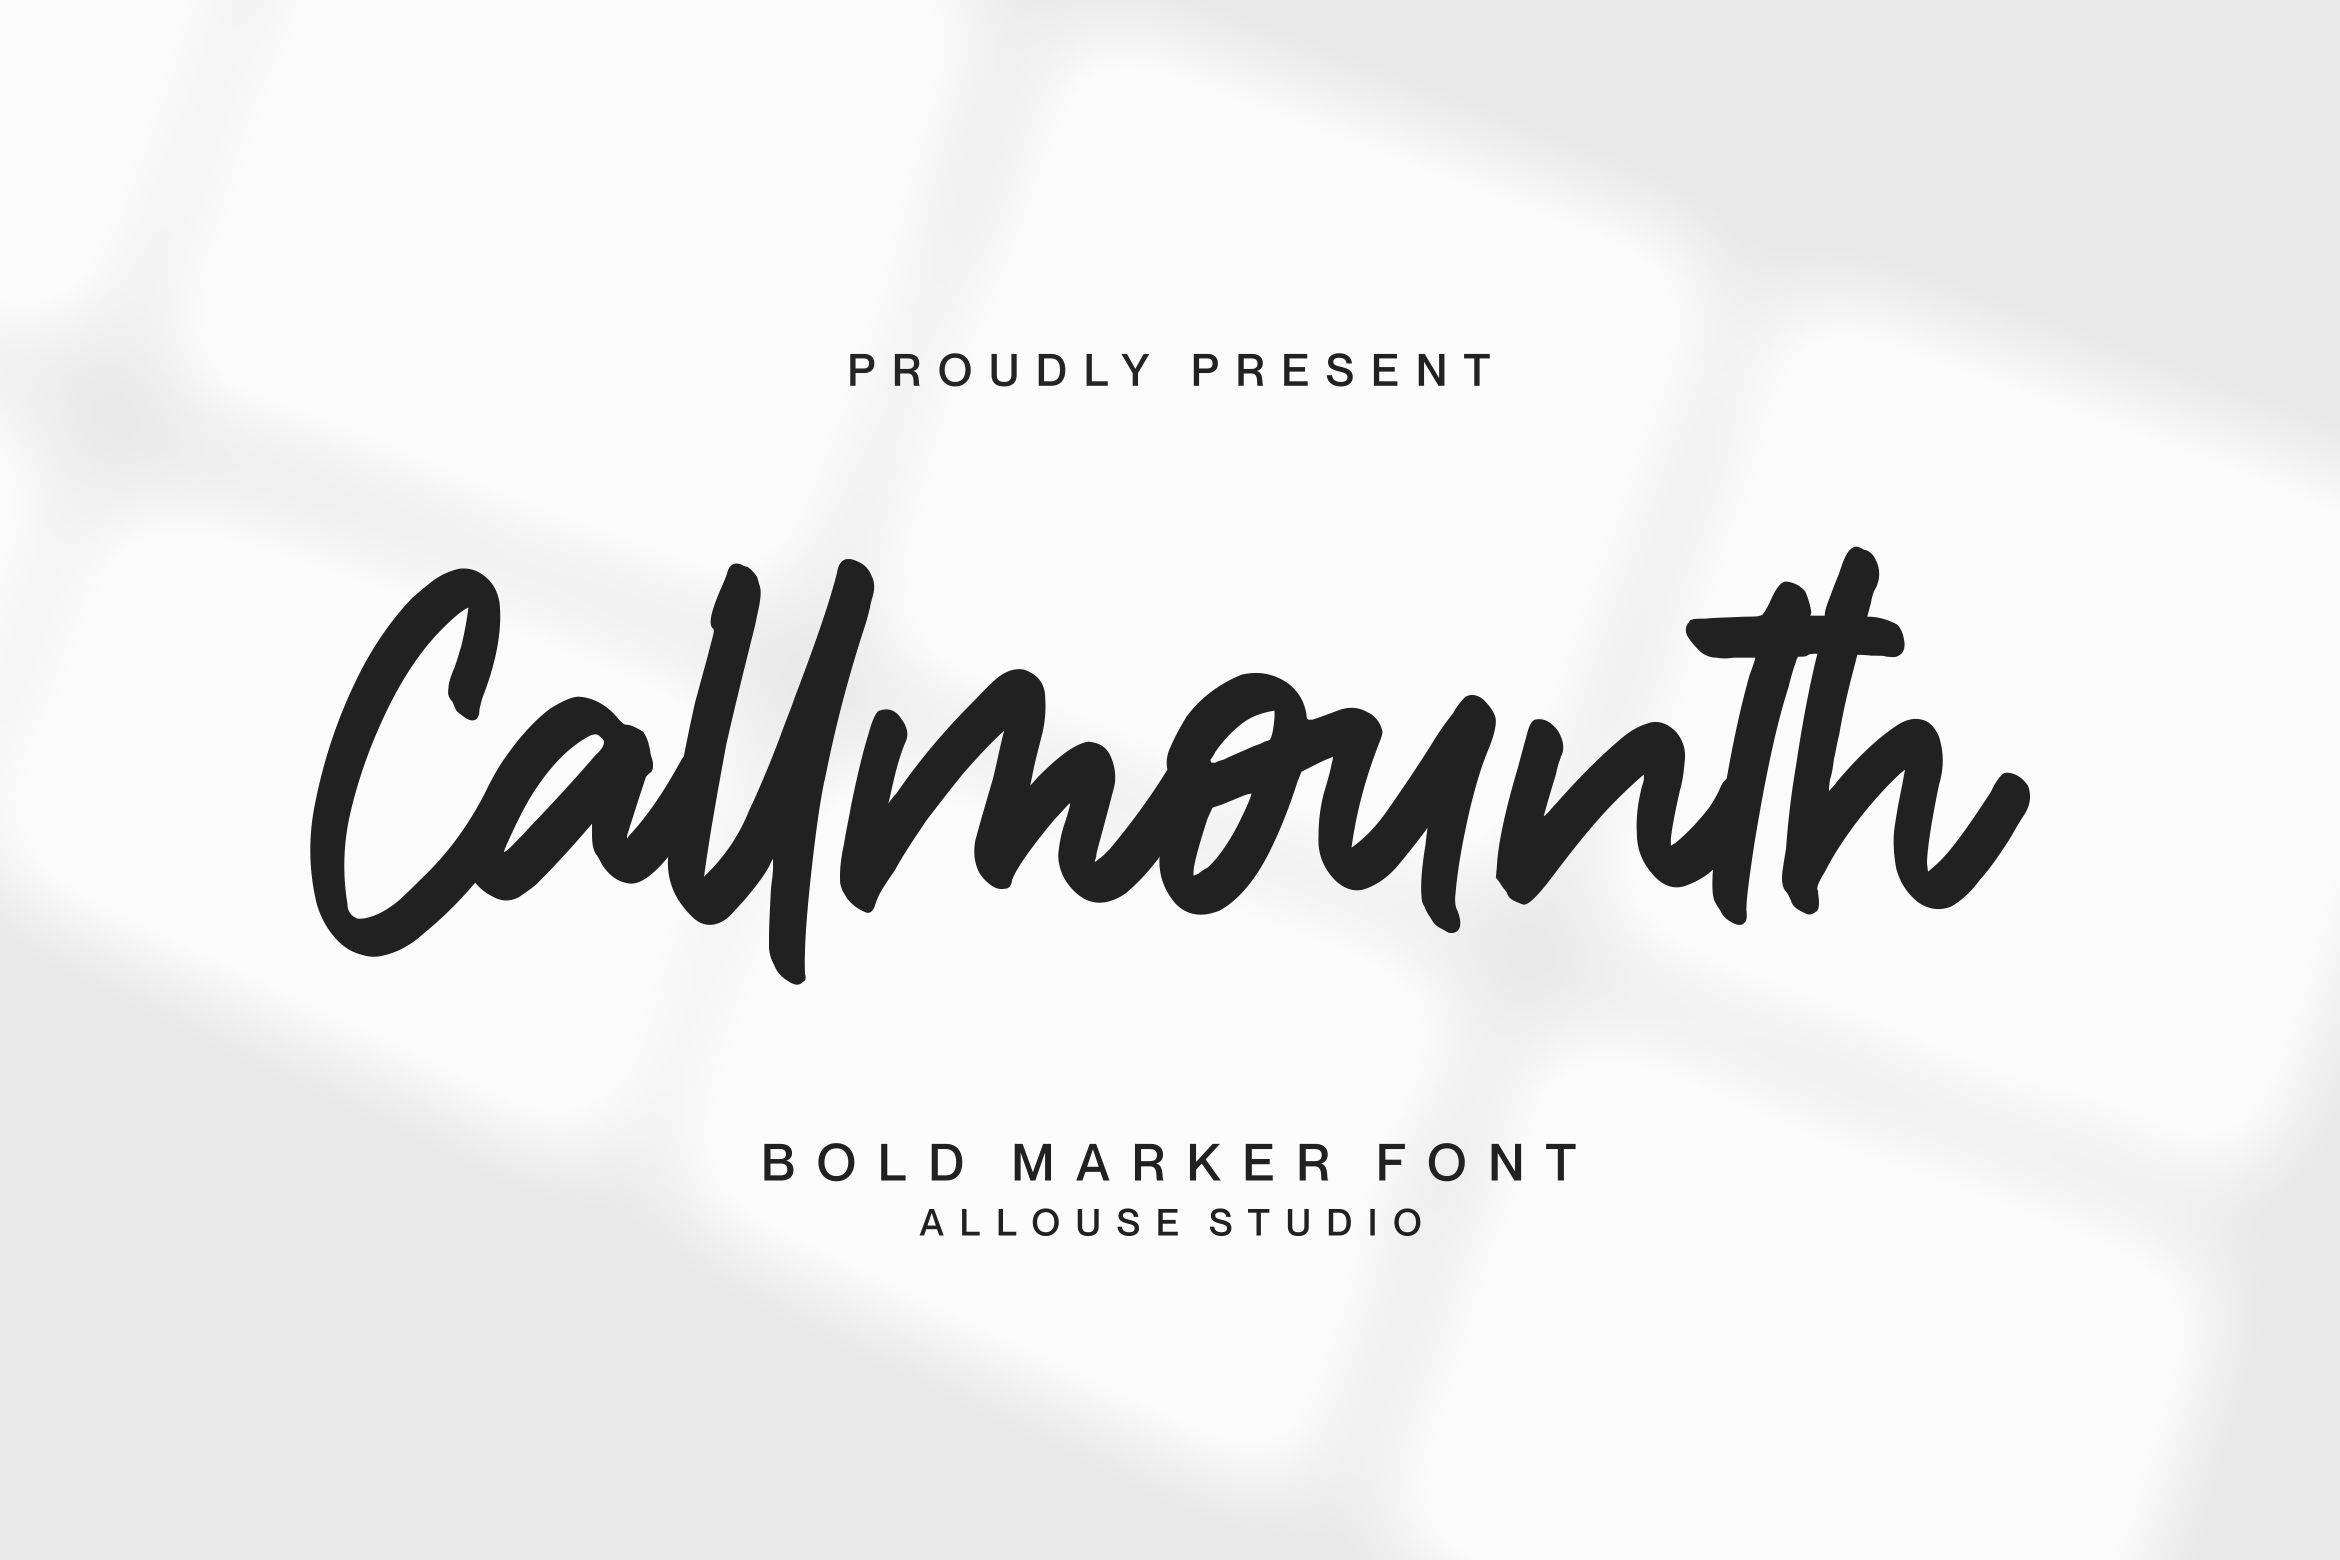 My favorite FREE fonts from dafont.com  Free script fonts, Silhouette  fonts, Masculine script fonts